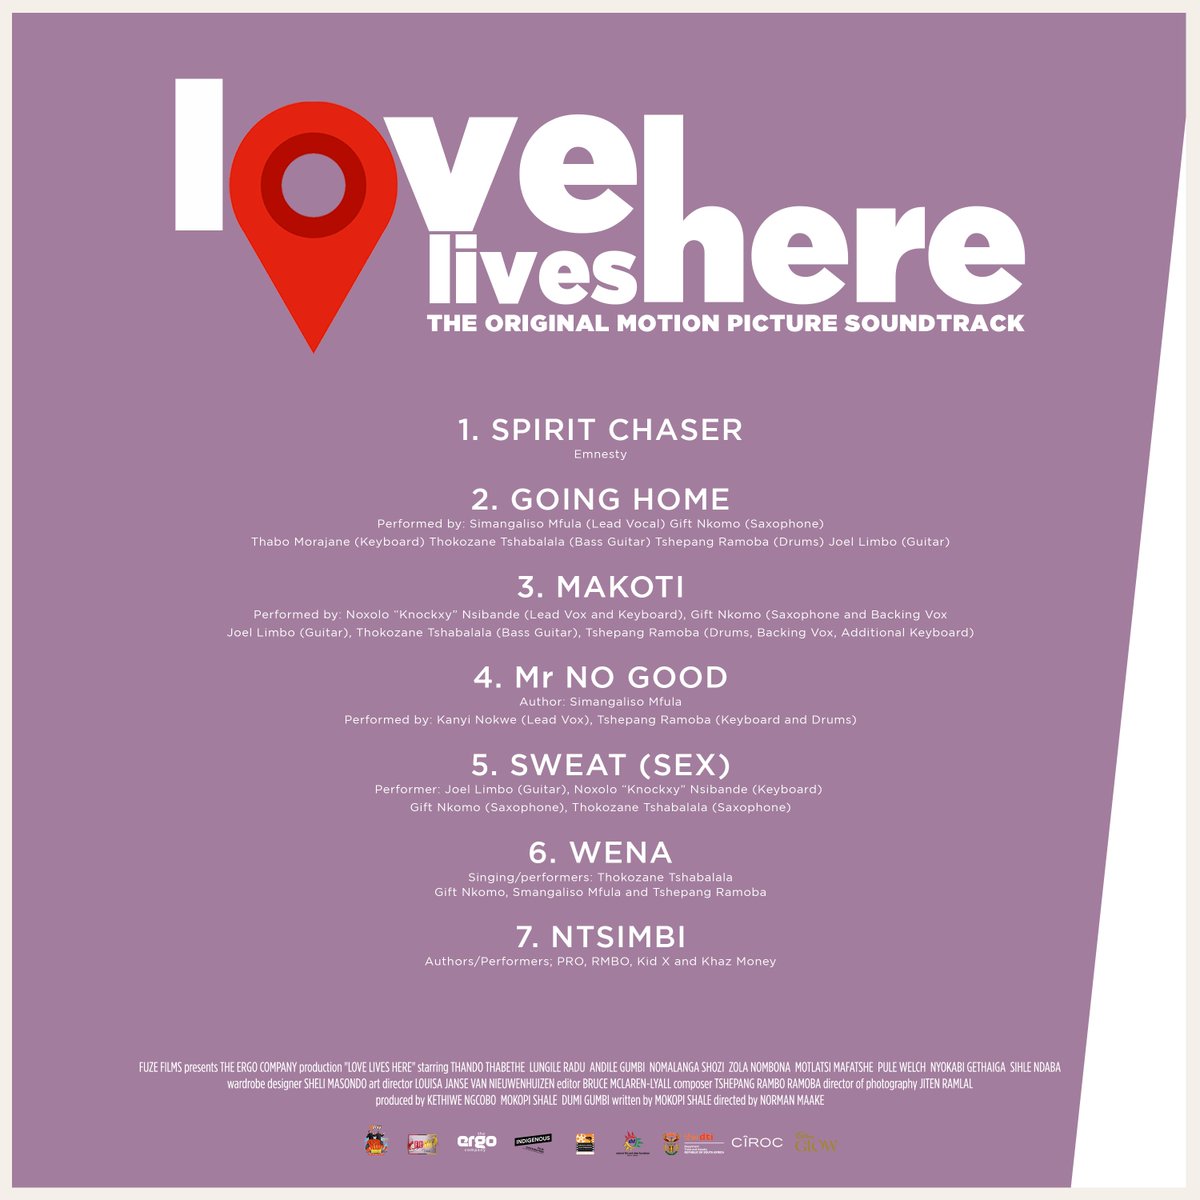 Lovelivesheremovie On Twitter The Love Lives Here Motion Picture Official Soundtrack Is Finally Here To Grace Your Ears Enjoy The Musical Experience Of Love Lives Here Available Now Https T Co Flcw0hnyon Https T Co Hk9sk9owv1